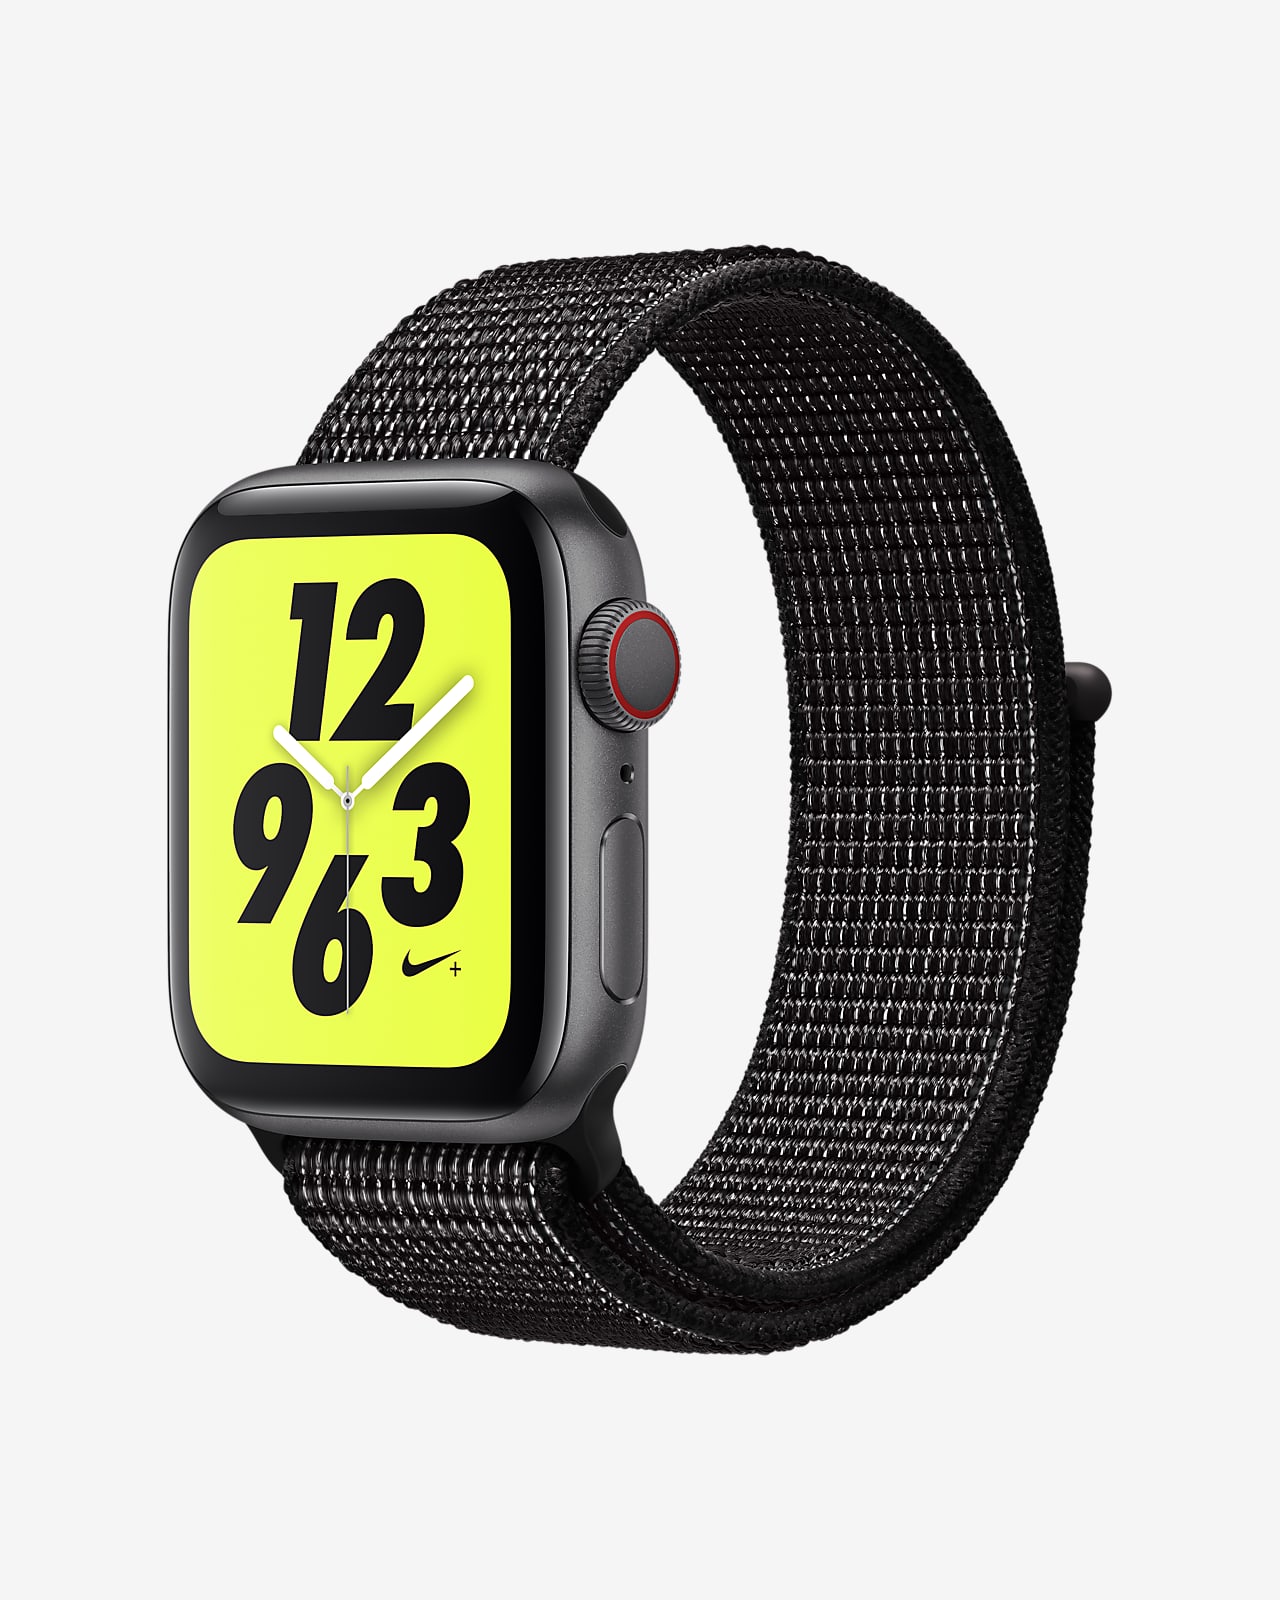 Apple Watch Nike+ Series 4 out now, limited supplies at retail |  AppleInsider